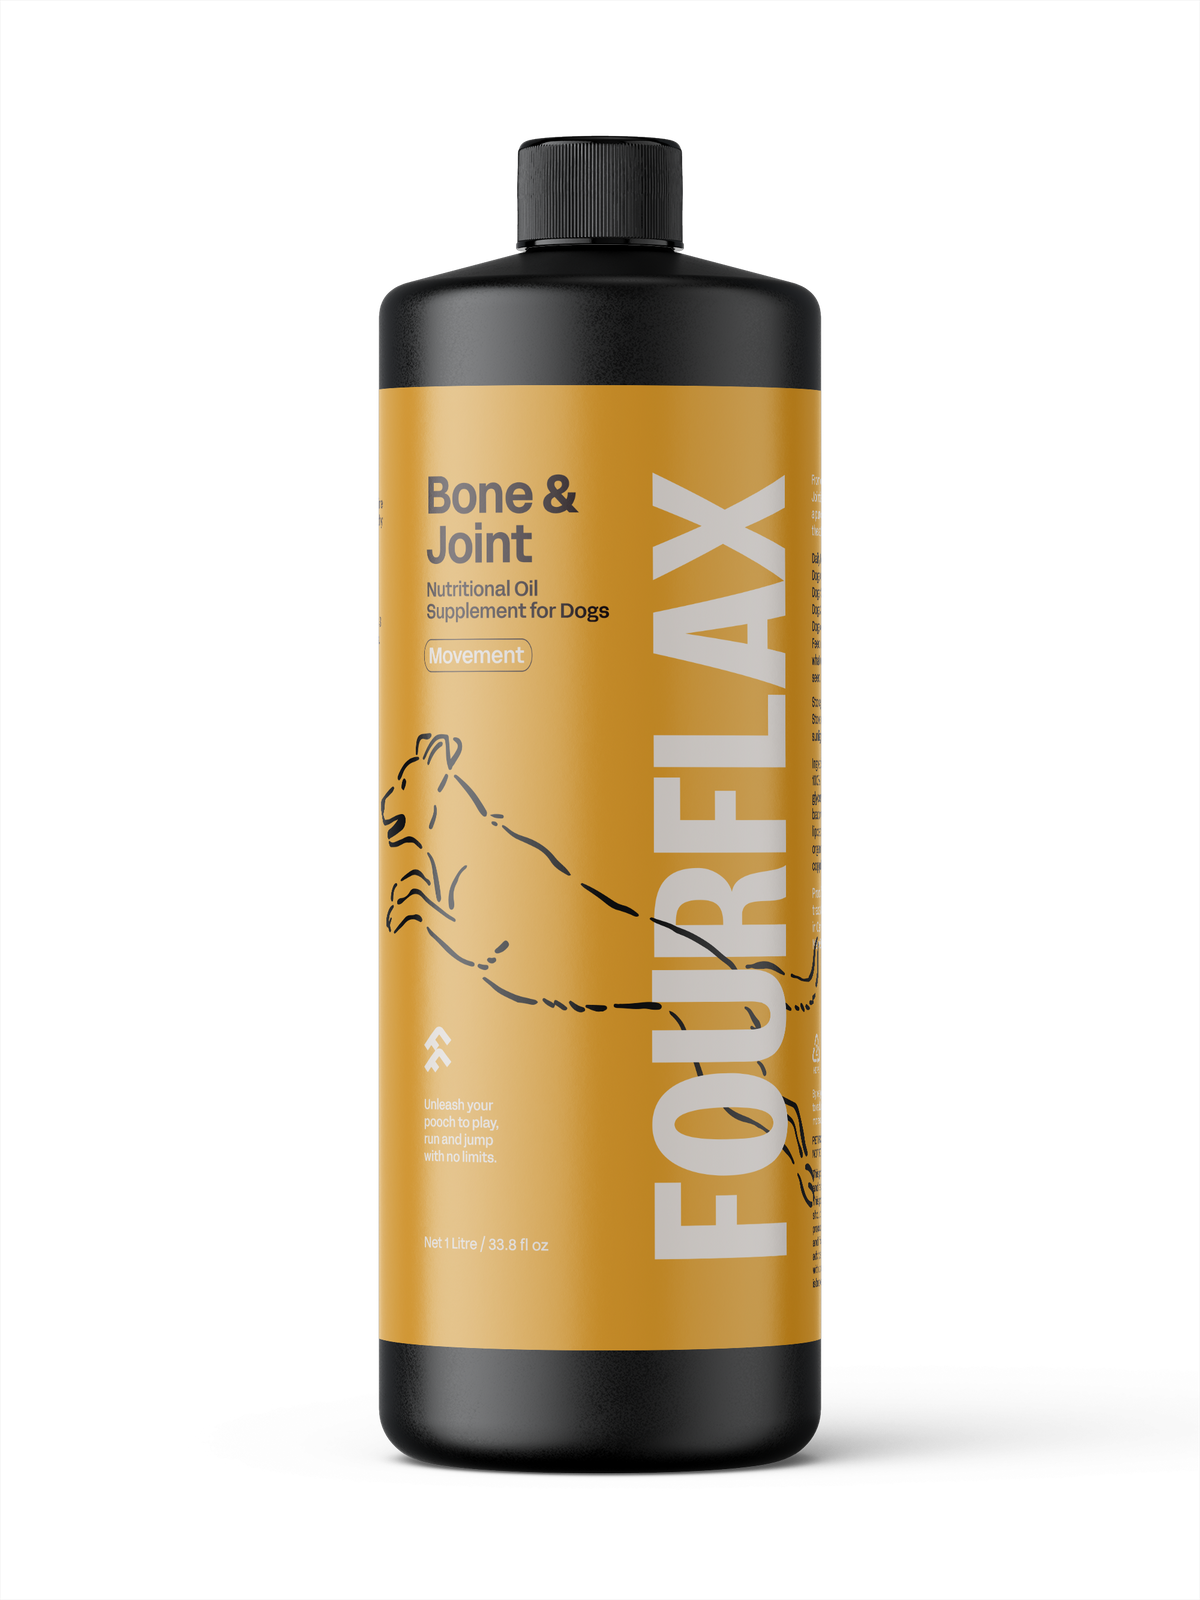 Fourflax Bone & Joint Oil for Dogs